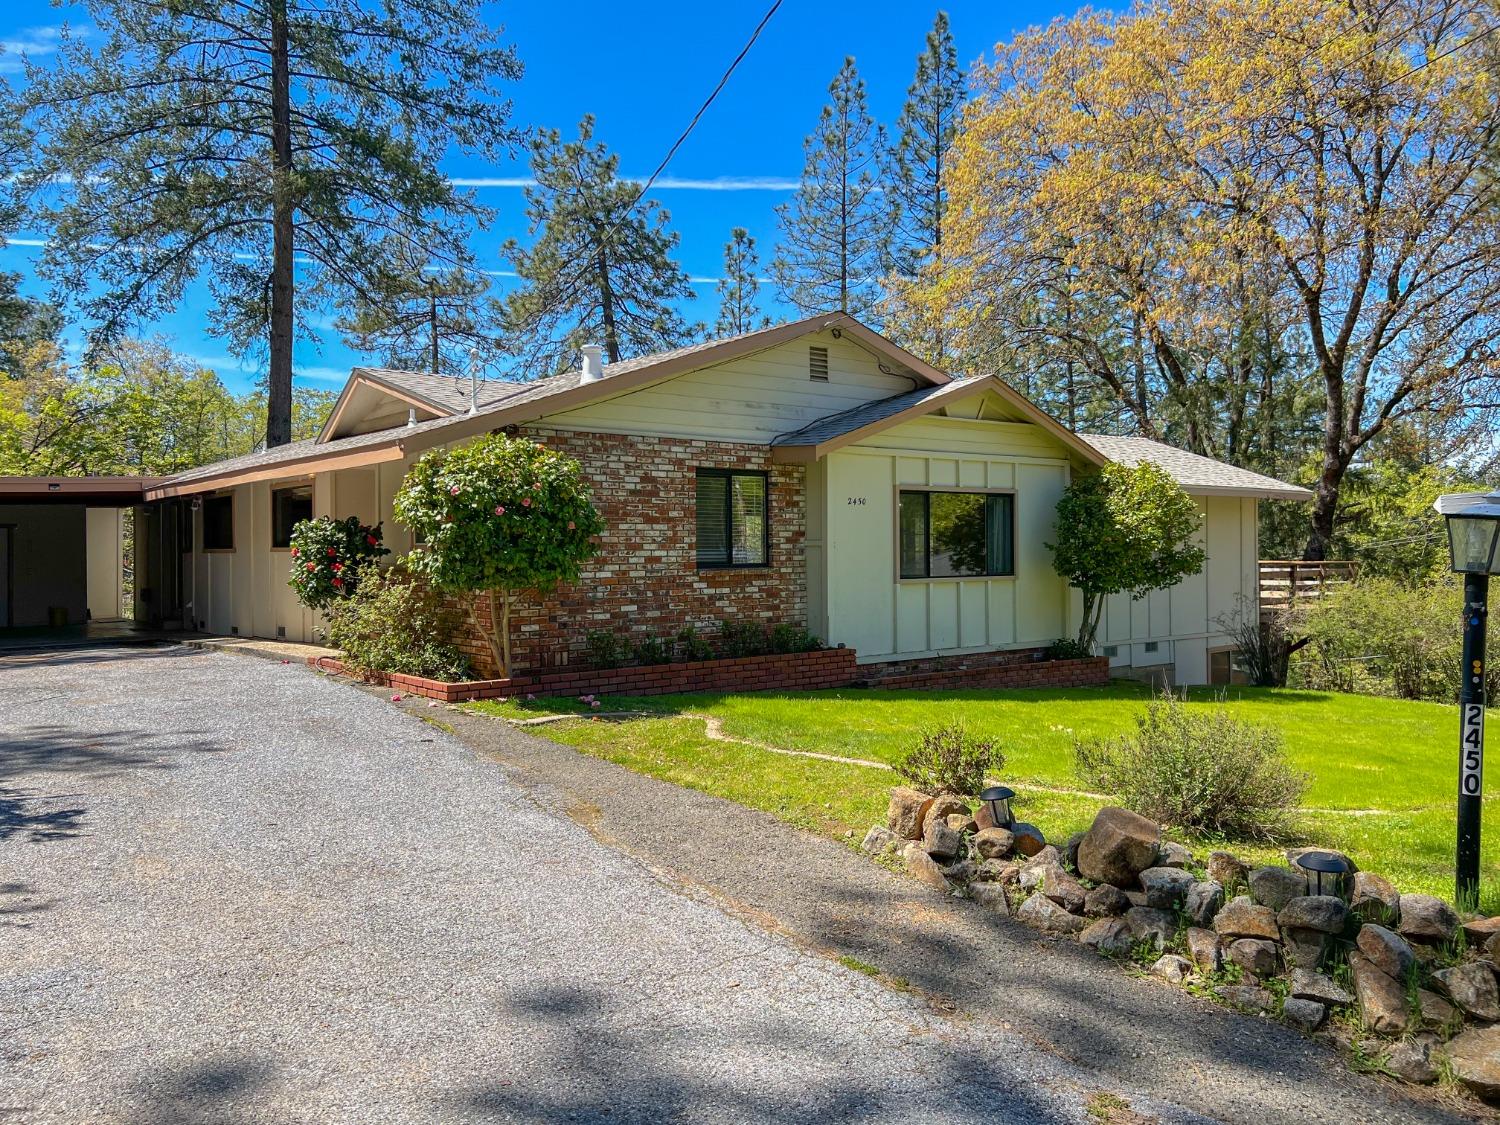 Photo of 2450 Giovanni Dr in Placerville, CA